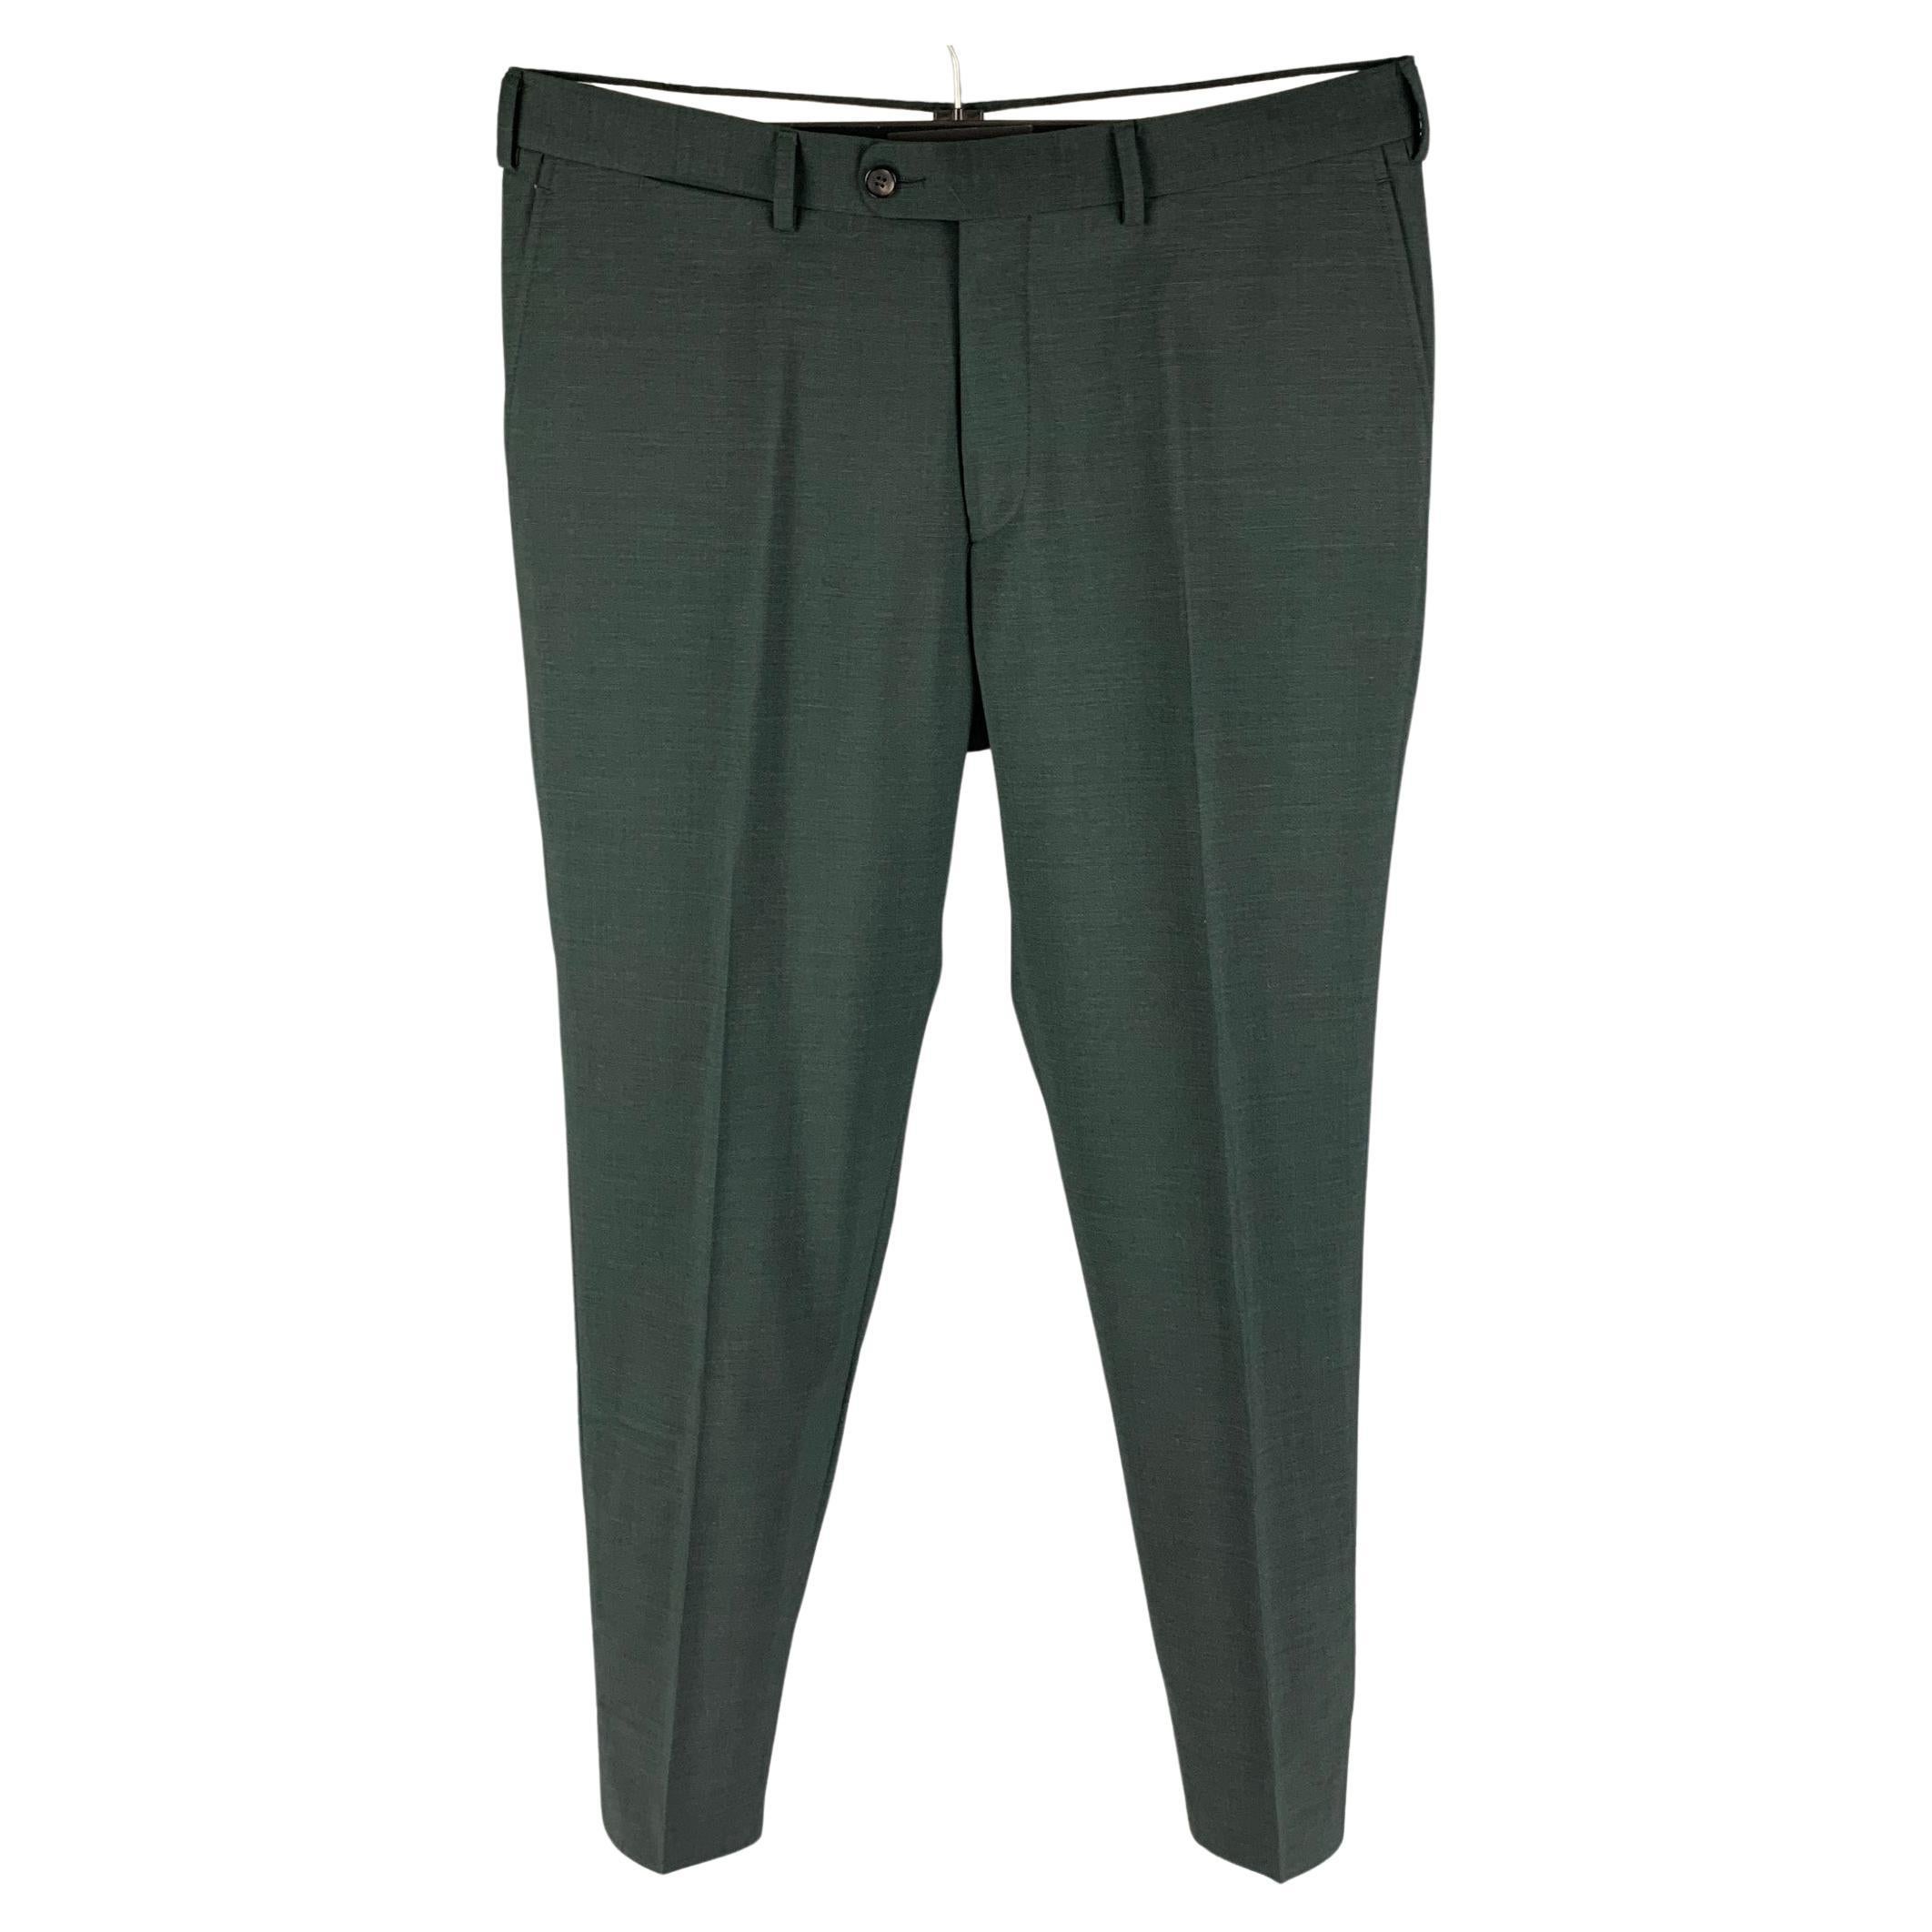 SUITSUPPLY Size 34 Green Forest Green Wool Zip Fly Dress Pants